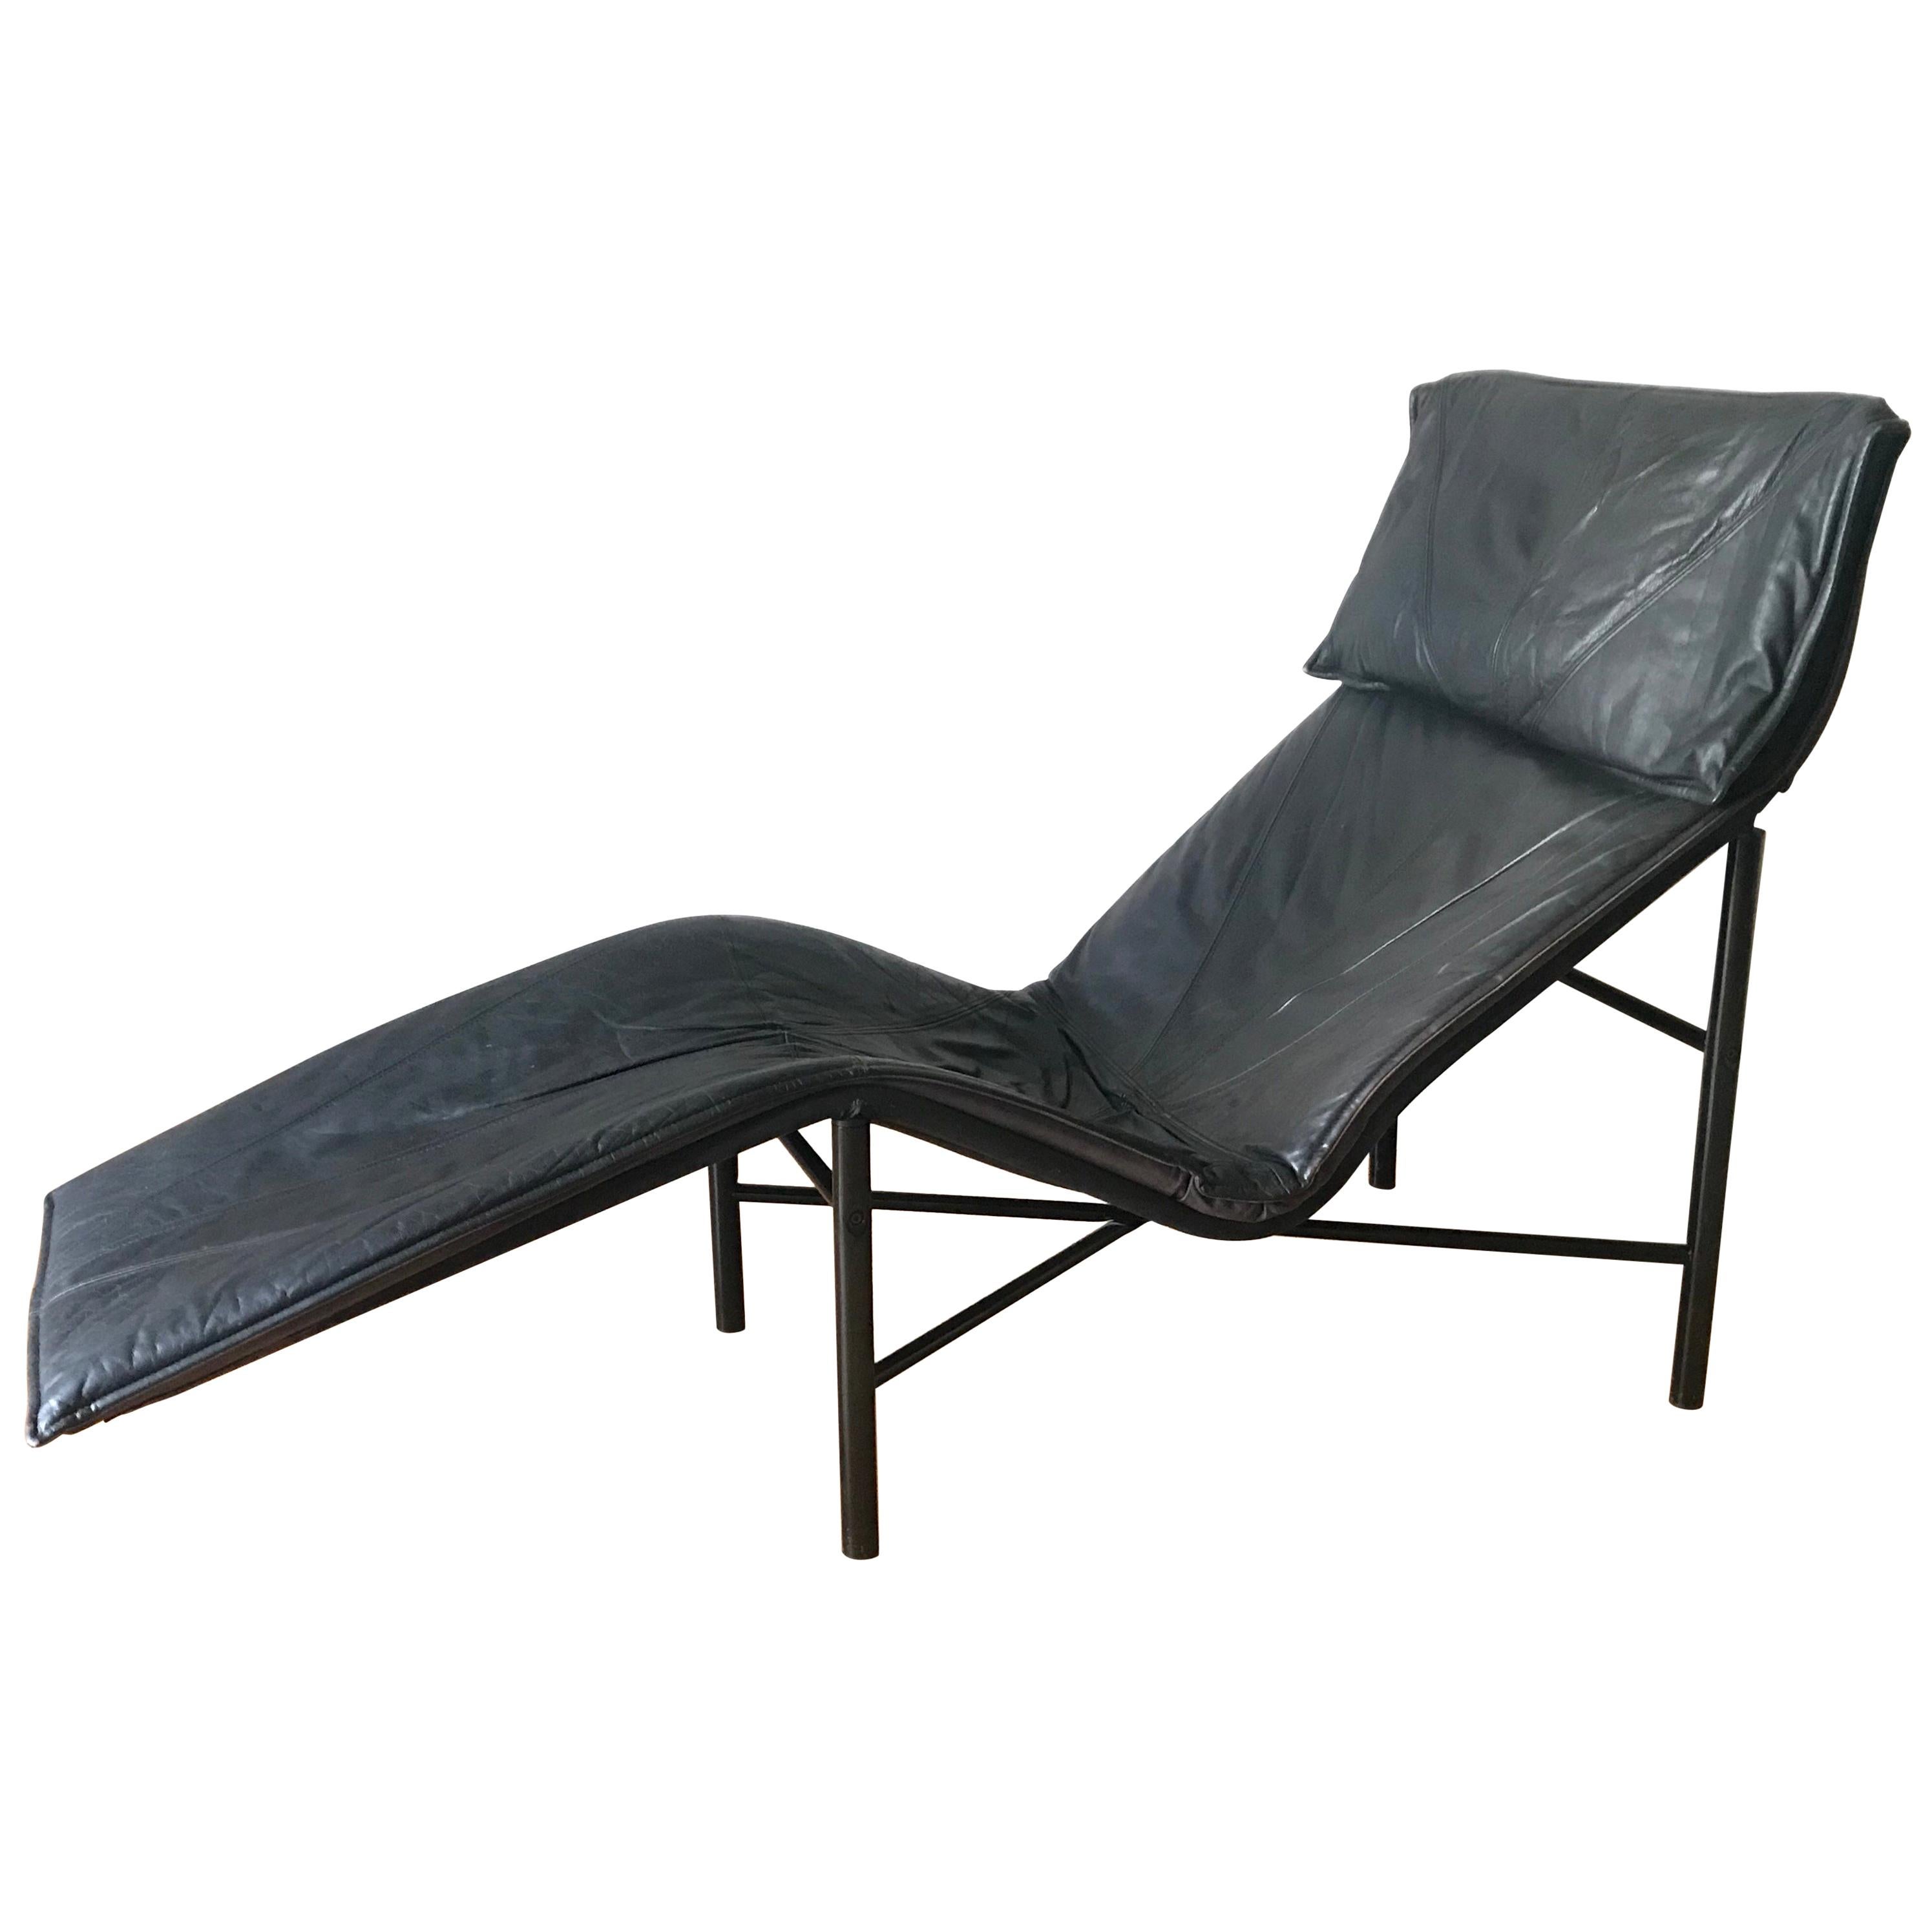 Post Modern Tord Björklund “Skye” Chaise Lounge for Ikea, Sweden, circa 1980s For Sale